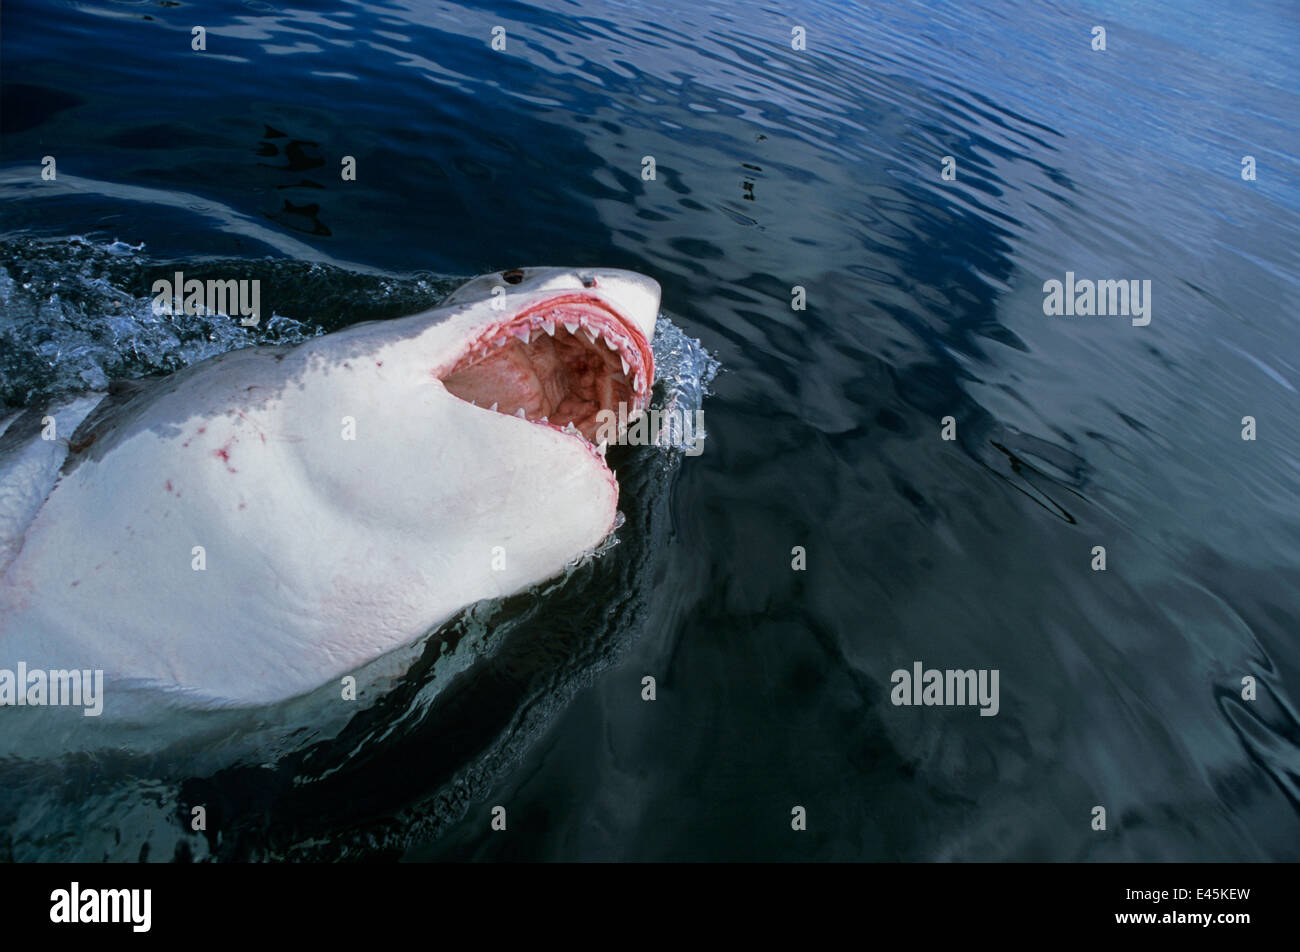 Great White Shark (Carcharodon carcharias) surfacing with mouth open, Dyer Island, South Africa, Atlantic Ocean. Stock Photo